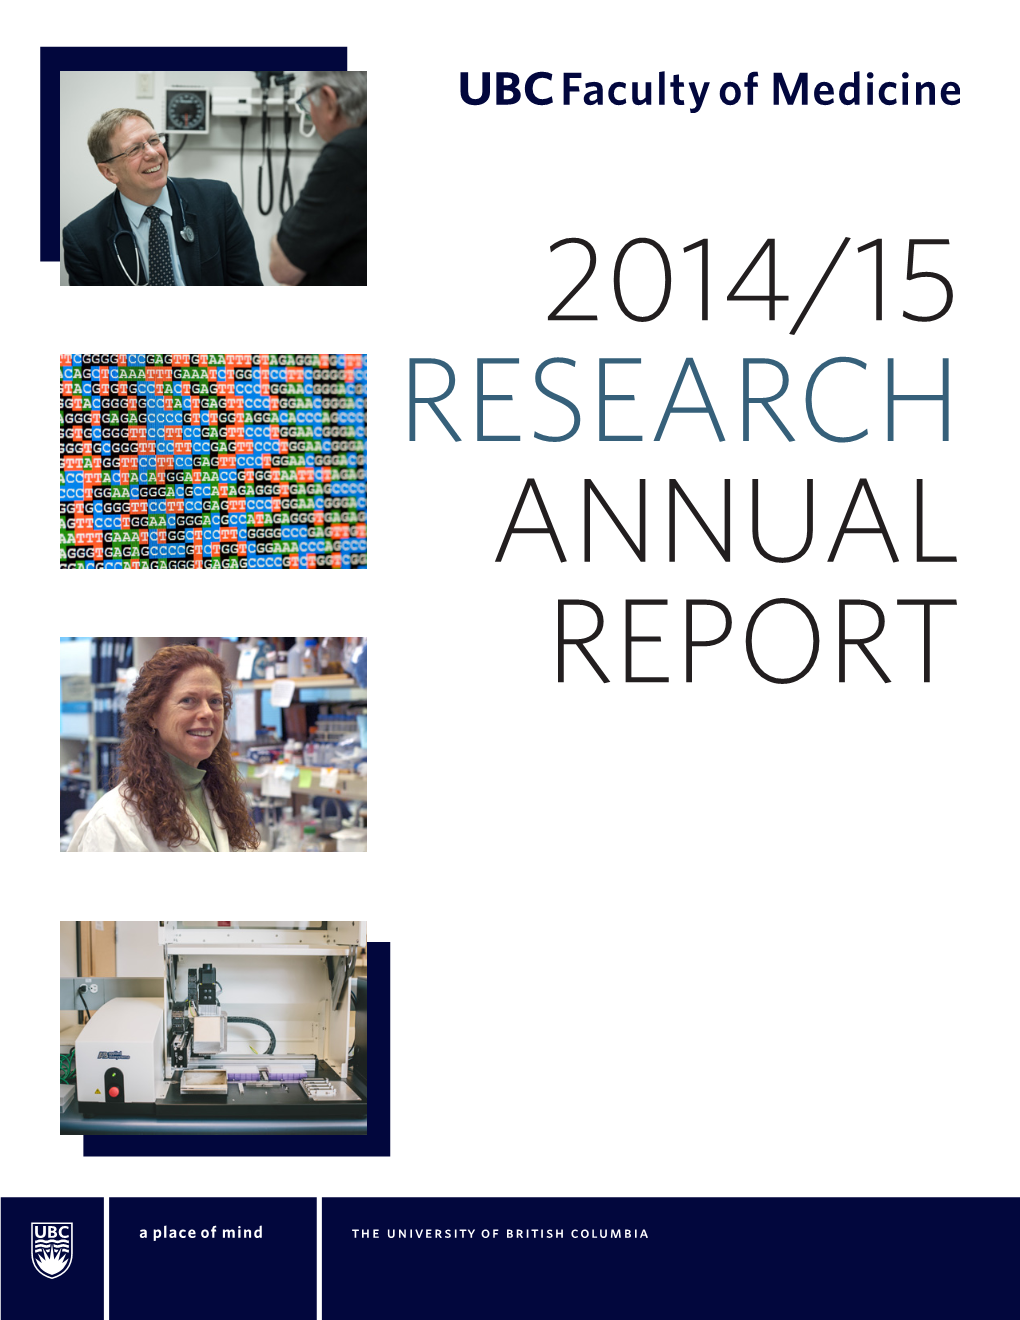 2014/15 Research Annual Report